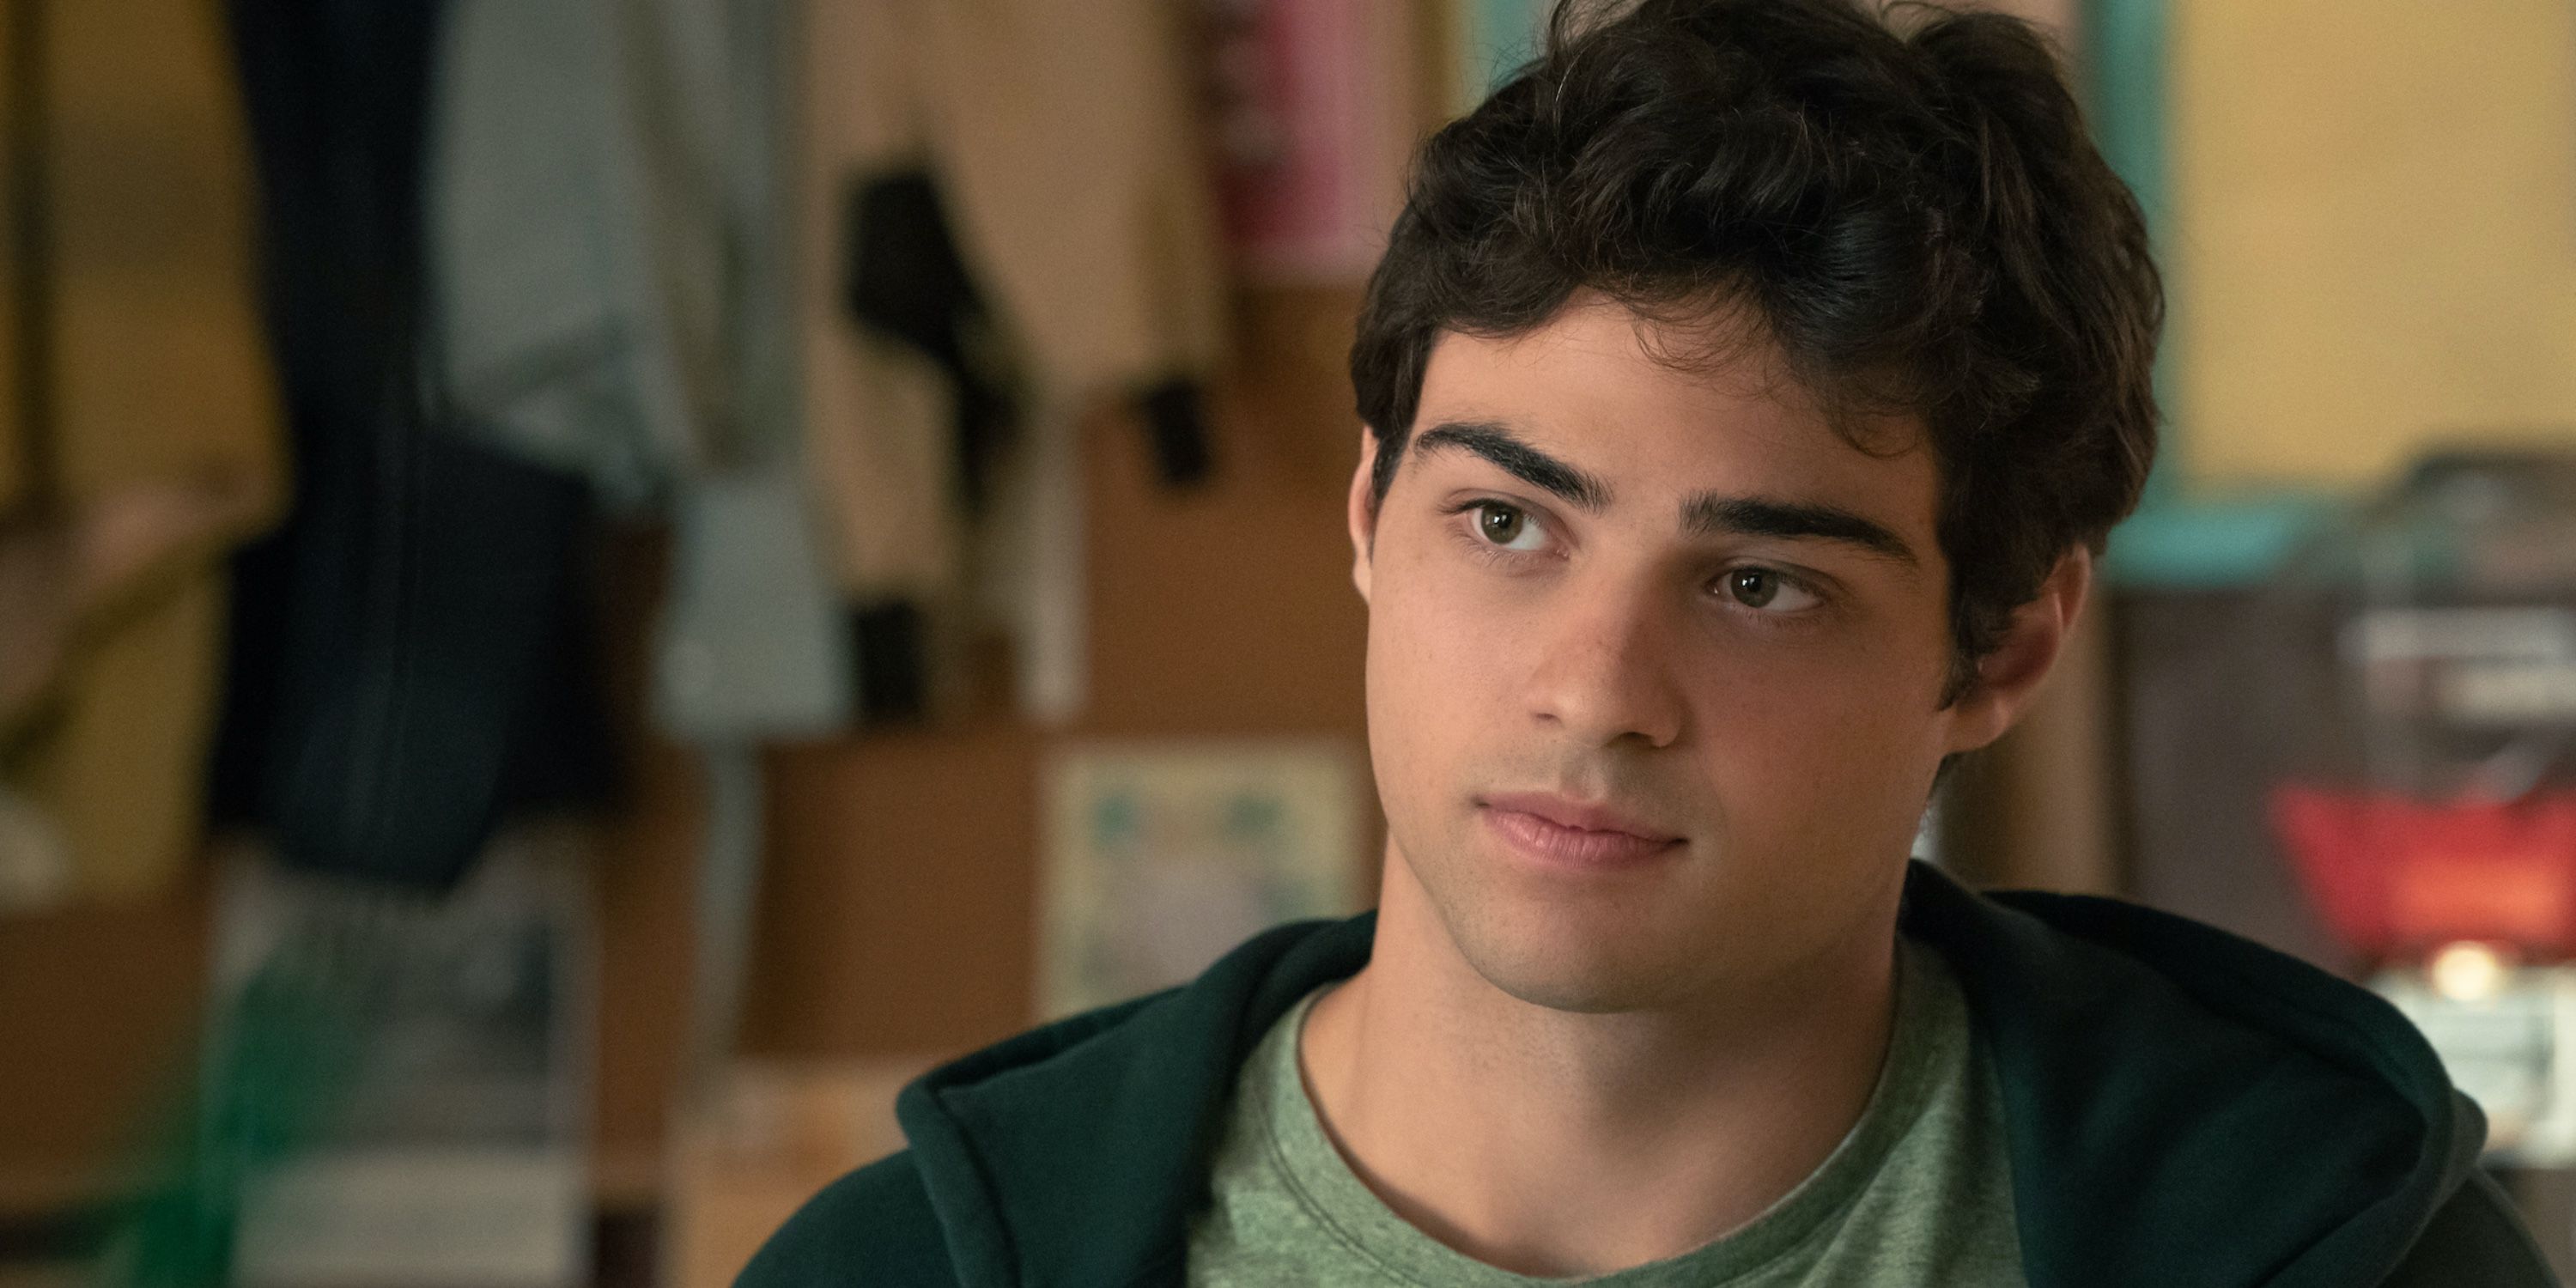 Noah Centineo in To All the Boys: Always and Forever on Netflix